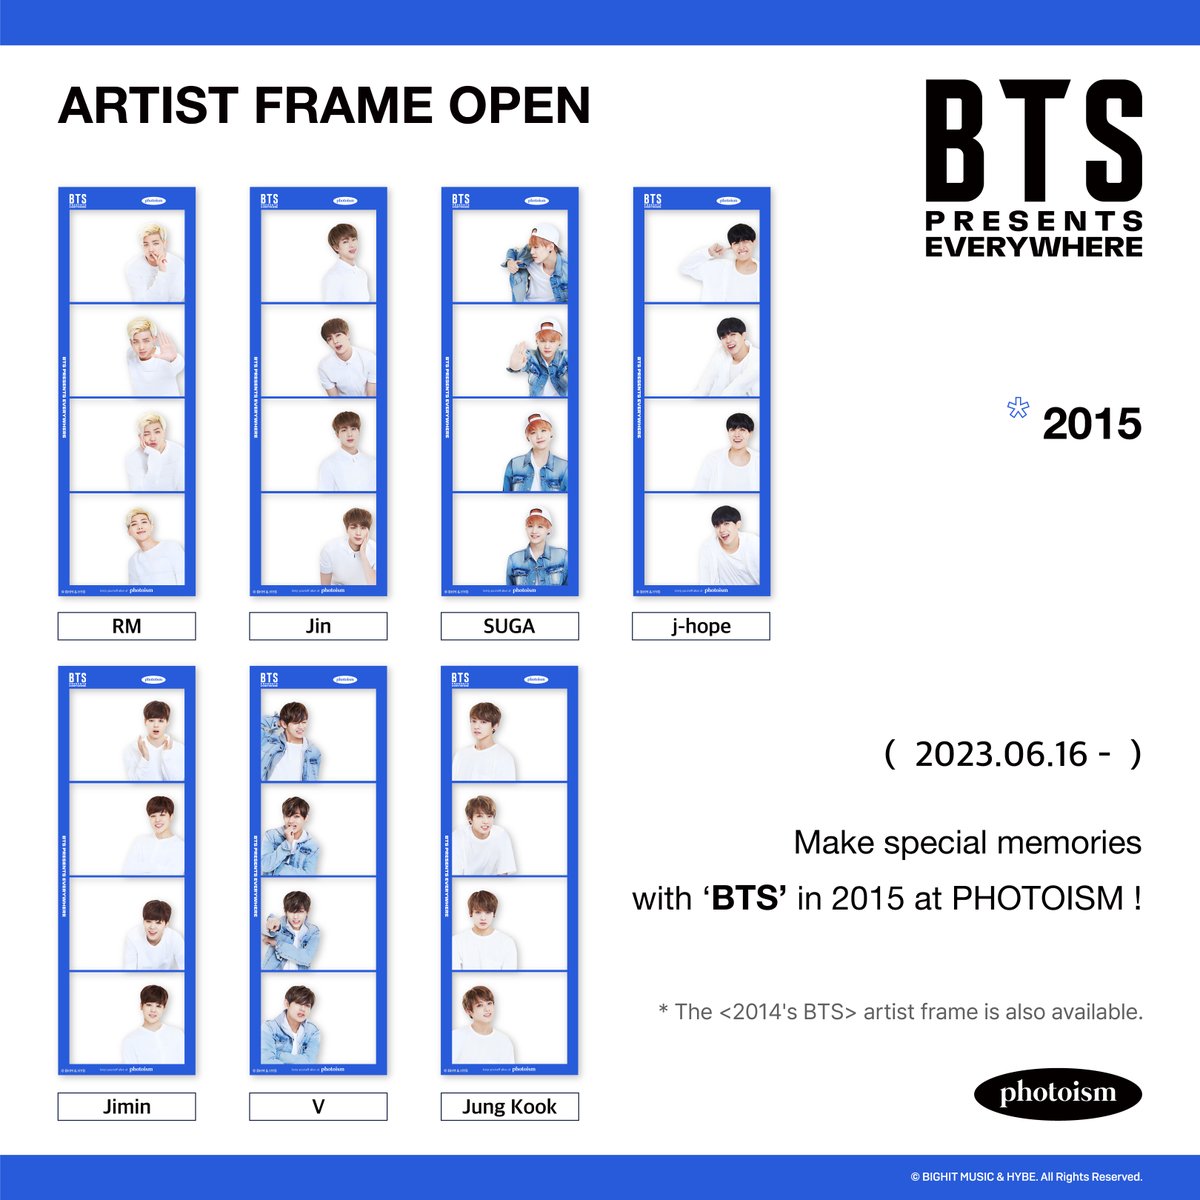 PHOTOISM with ‘BTS in 2015’ presents the artist frame! PHOTOISM is with BTS to celebrate their debut 10th anniversary 💜 Make special memories with <2015's BTS> at all of photoism stores from June 16. * The <2014's BTS> artist frame is also available.